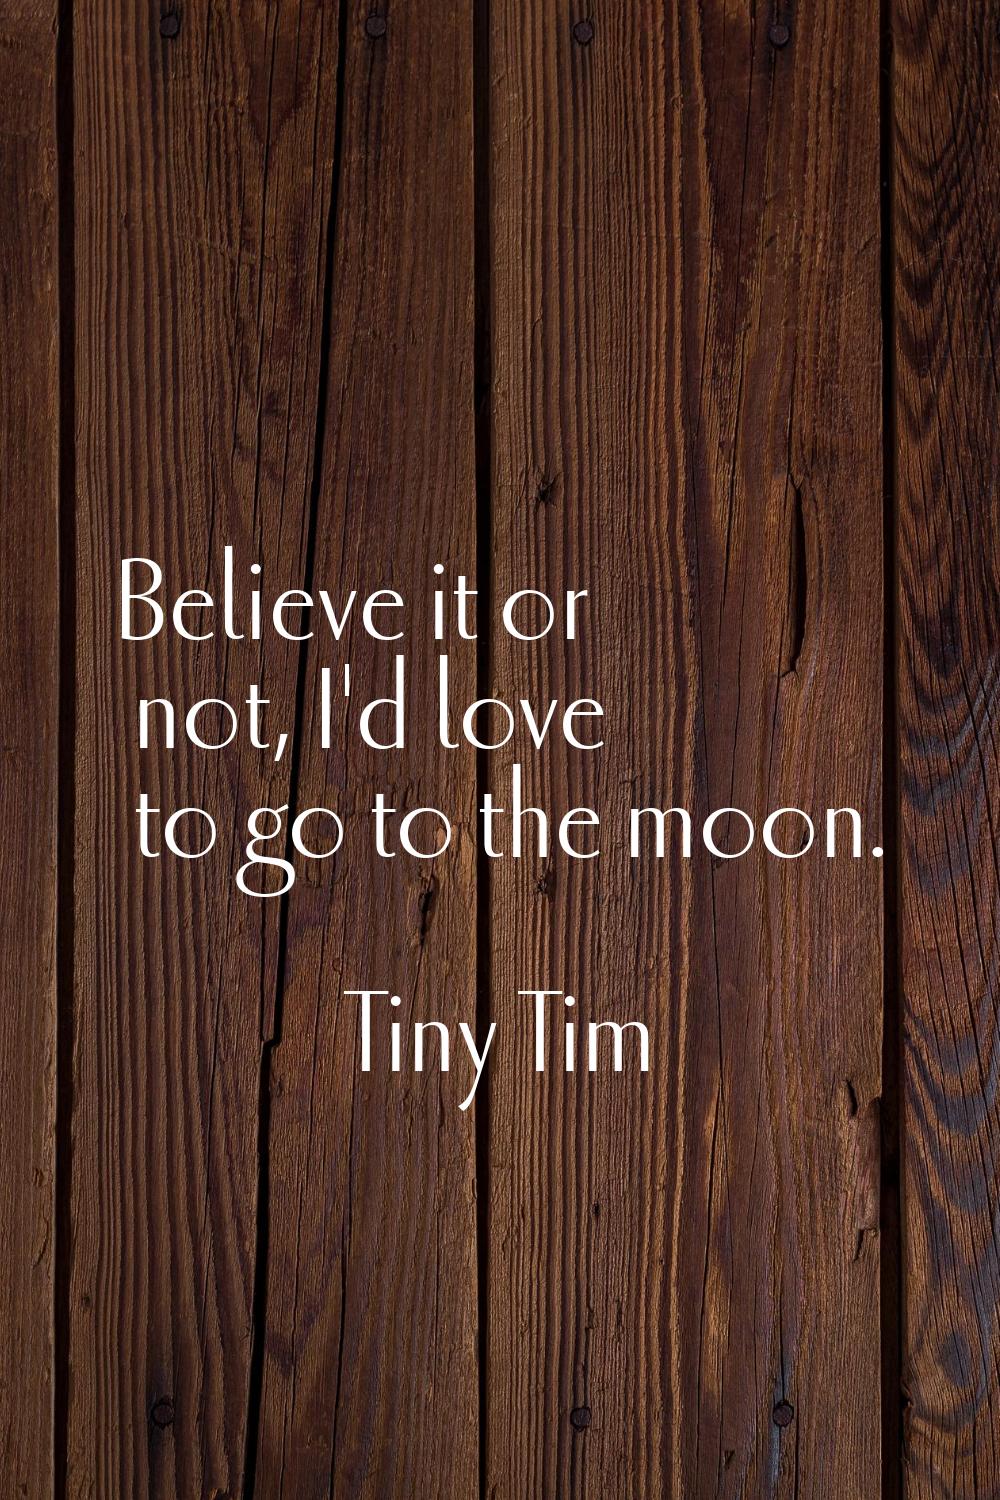 Believe it or not, I'd love to go to the moon.